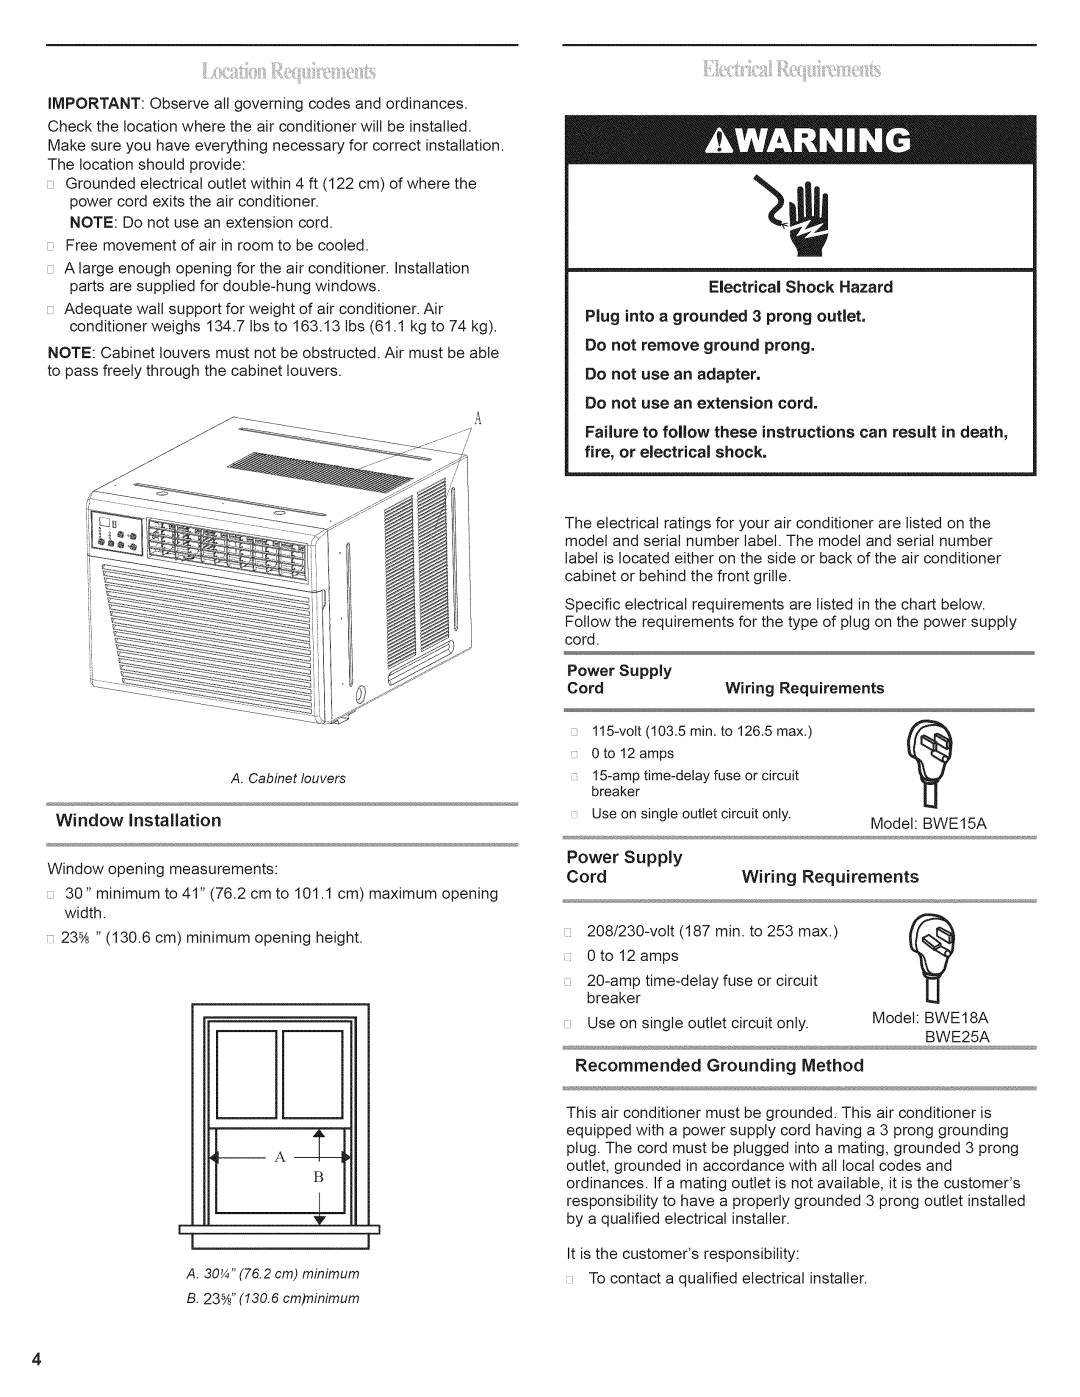 Black & Decker BWE18A manual A t, Power, Supply, Cord, Wiring, Requirements, A. Cabinet louvers, Do not remove ground prong 